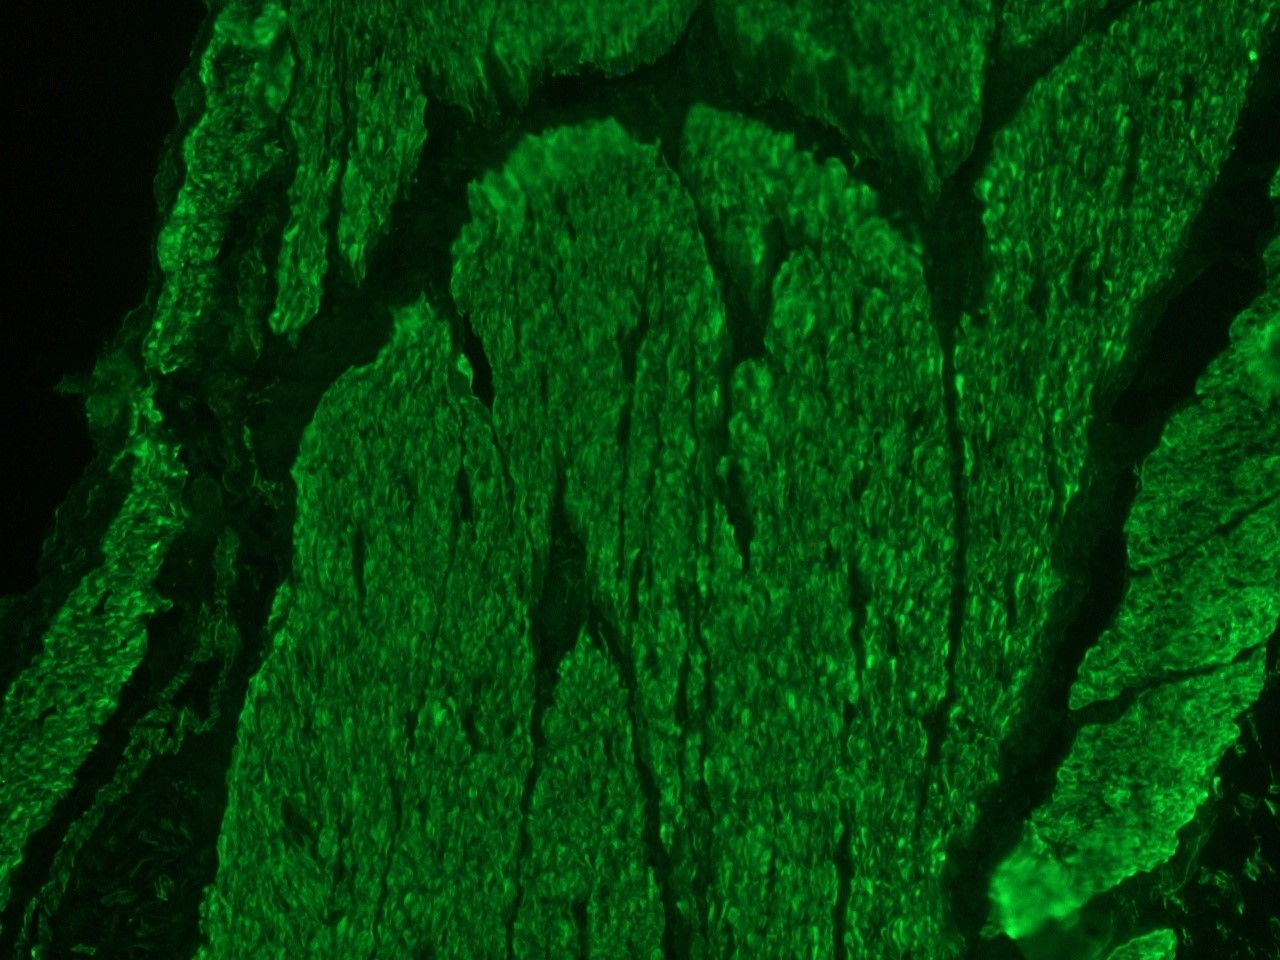 Figure 2. Muscle cell immunostaining in frozen section of chicken gizzard for desmin using MUB0402S (K5; diluted 1:200)